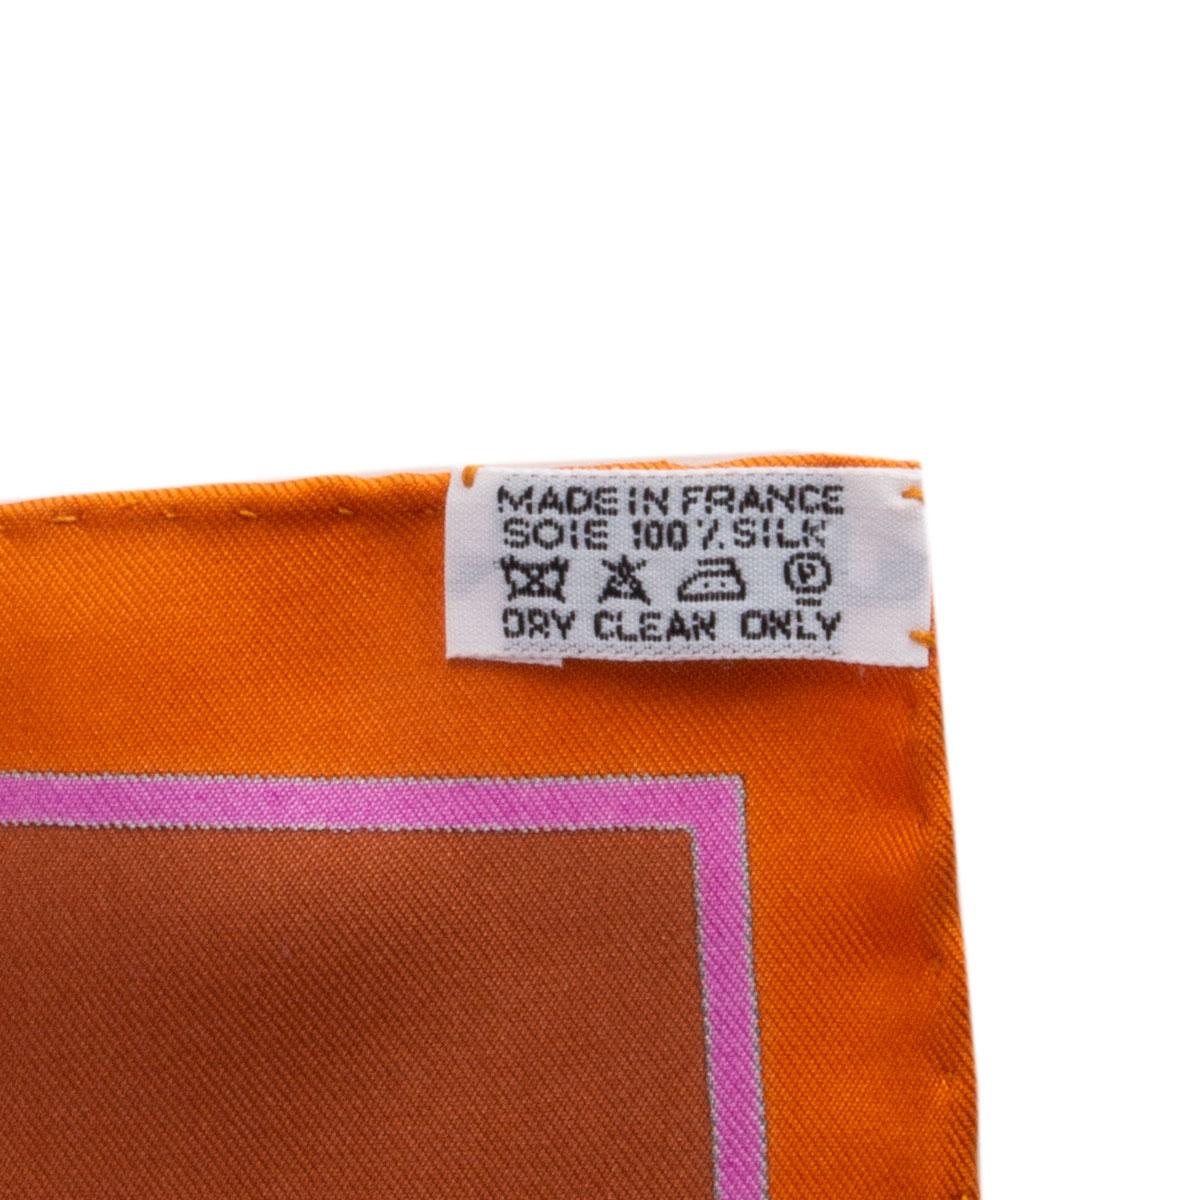 Hermes brown LES PAYS DES EPICES 90 silk twill Scarf 1